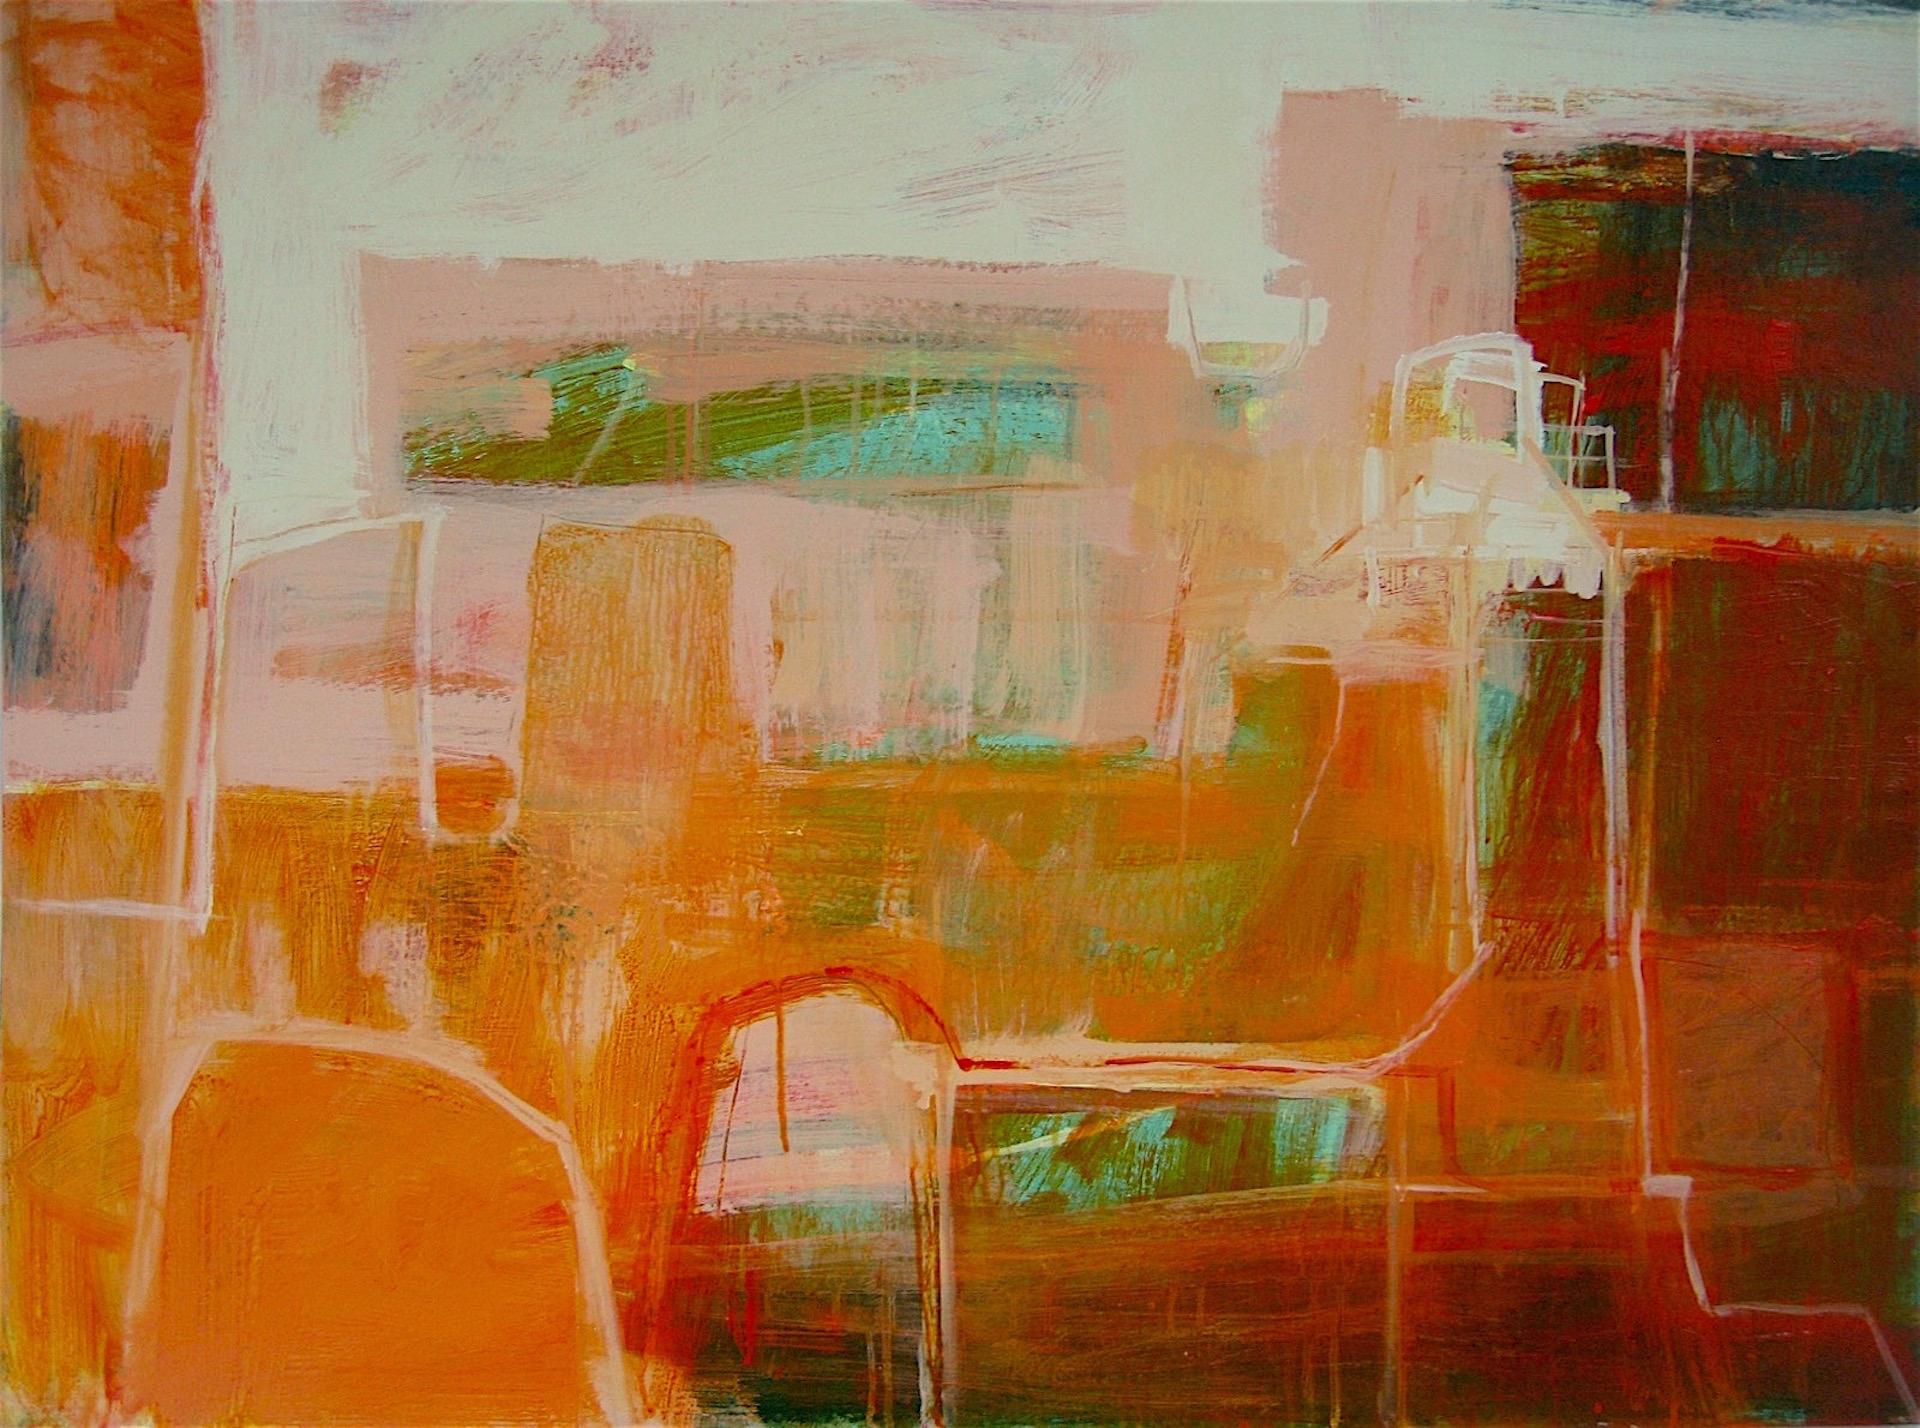 Abstract Painting Janet Keith - Peinture abstraite indienne d'après-midi, architecture indienne vibrante